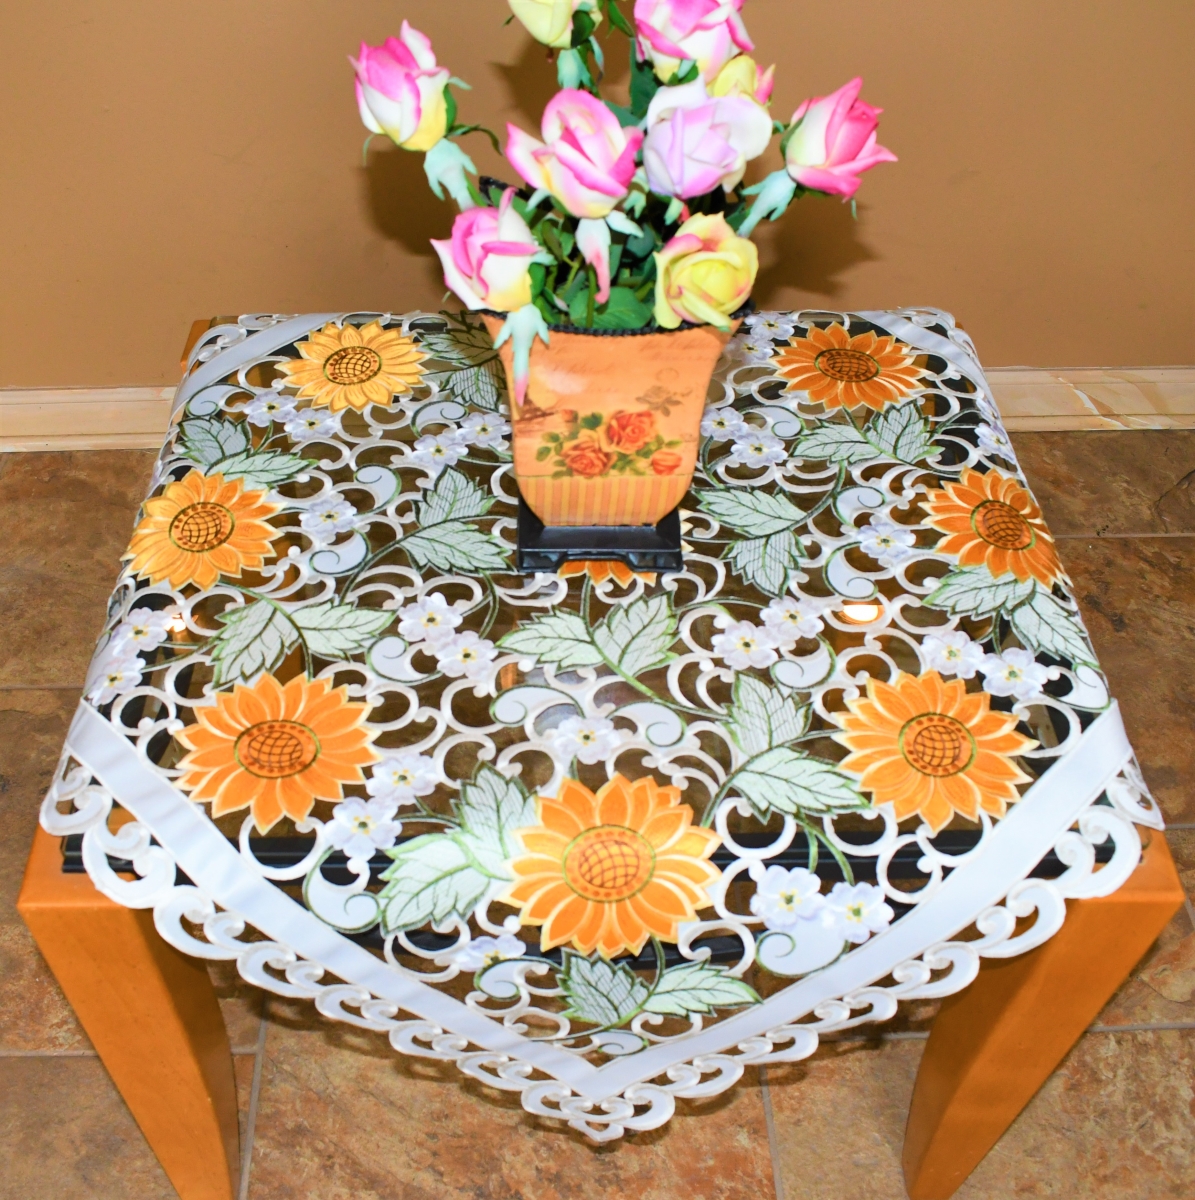 Picture of Sinobrite H8710-34x34SQ 34 x 34 in. Sunflower on Cream Fabric Square Table Topper